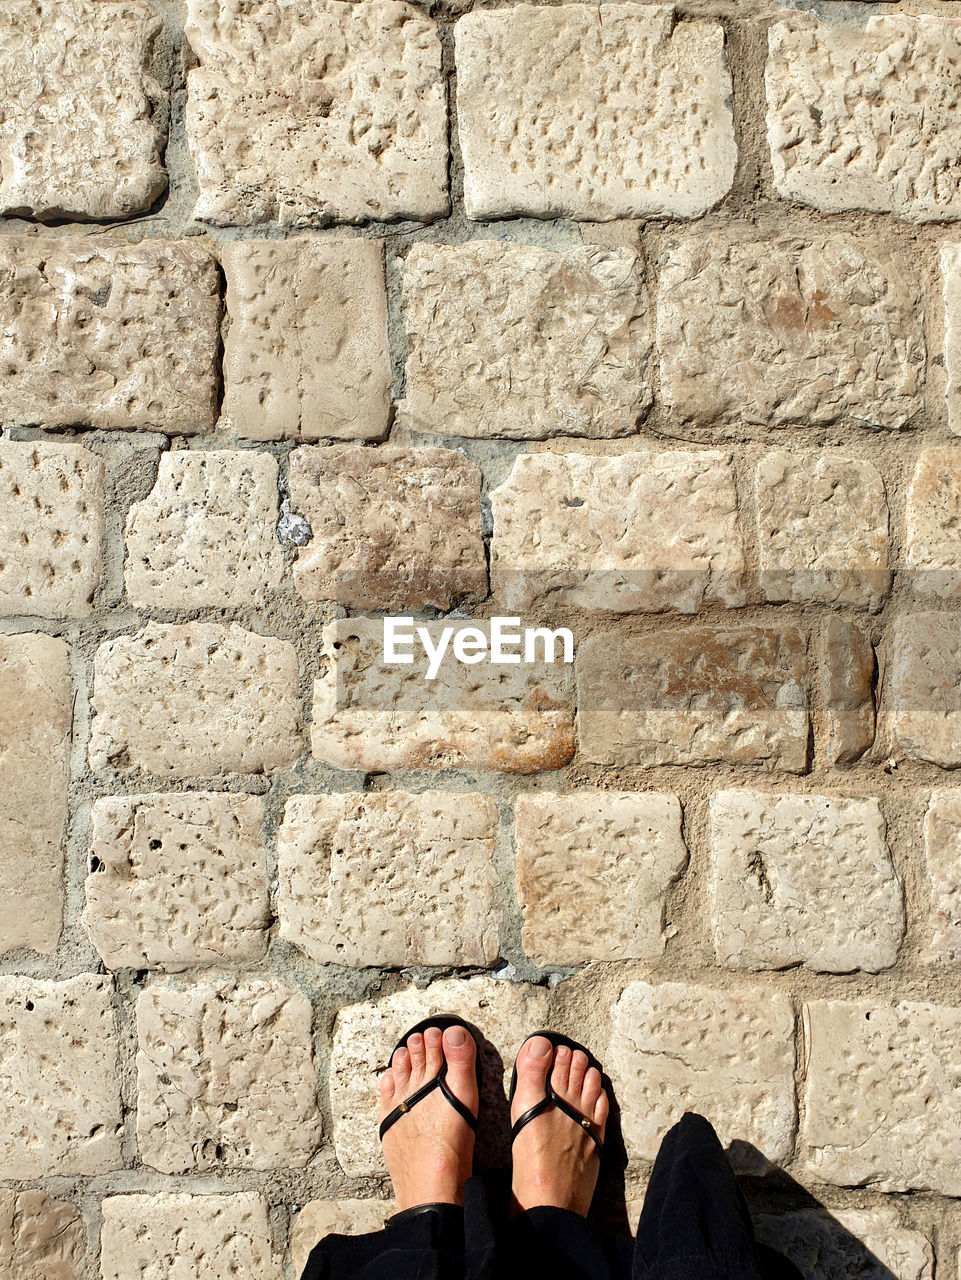 shoe, low section, one person, human leg, wall, standing, personal perspective, brick, lifestyles, architecture, day, limb, human limb, adult, stone wall, sandal, wall - building feature, human foot, leisure activity, brick wall, outdoors, women, built structure, men, sunlight